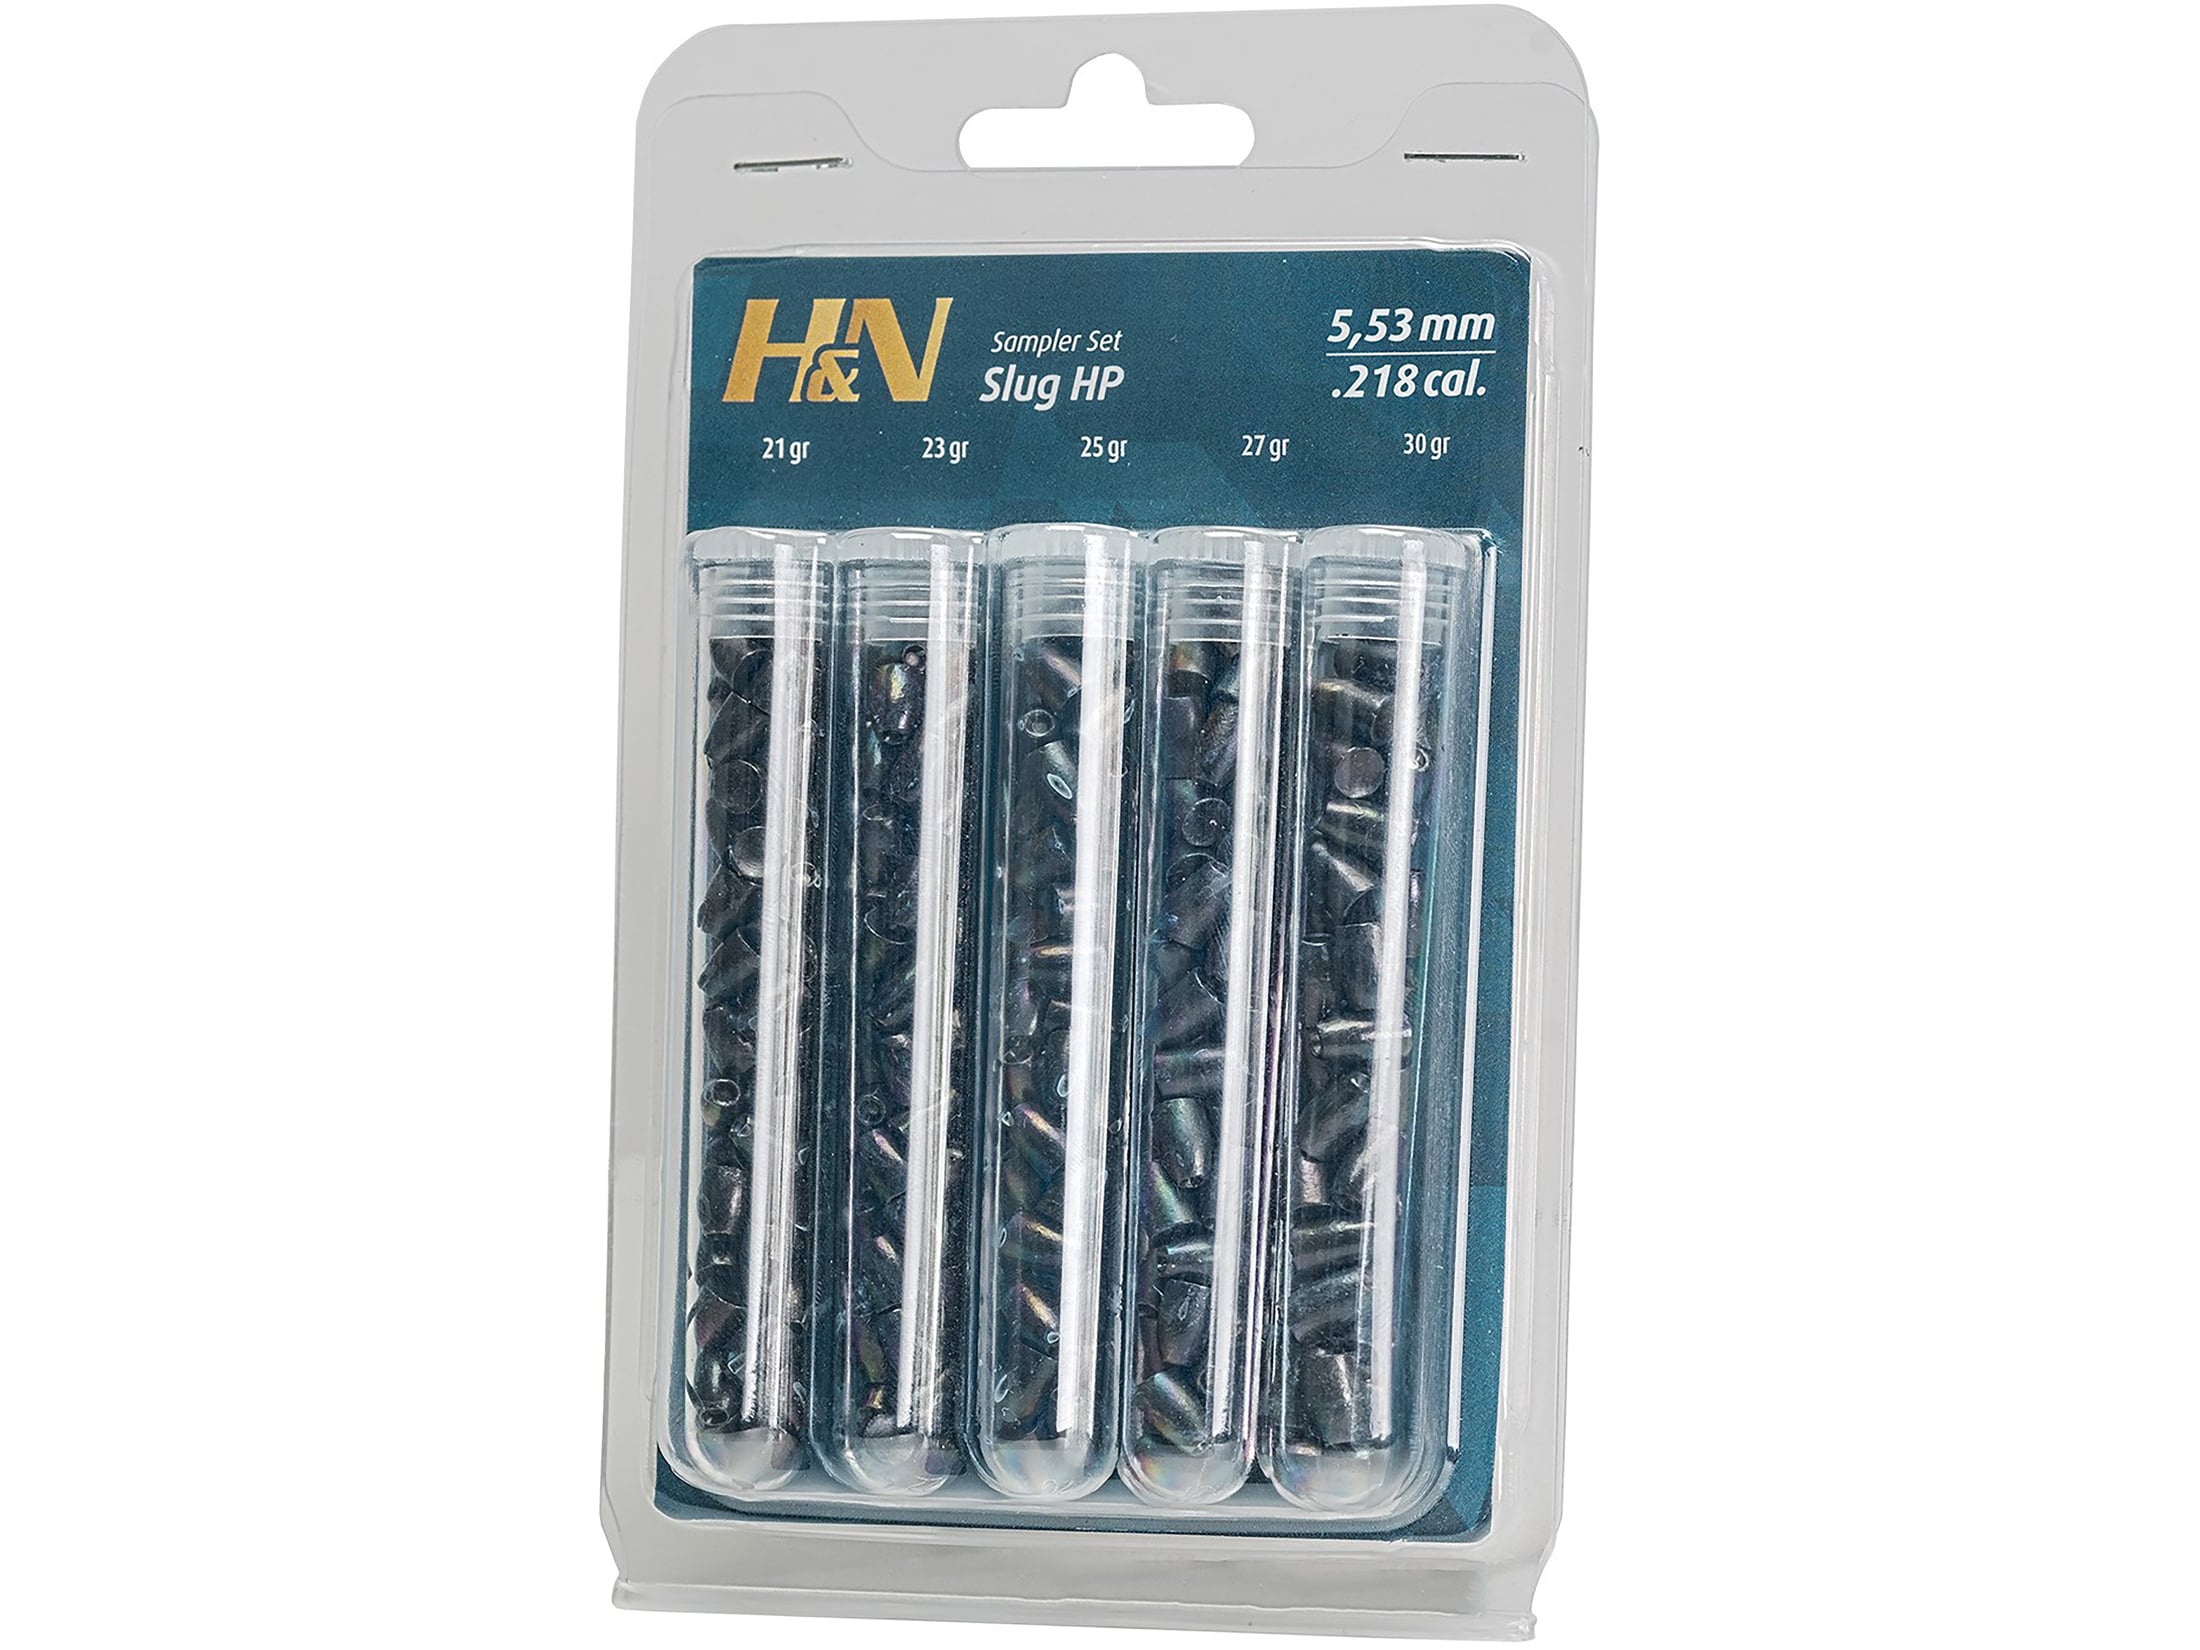 H and N Baracuda power .22 airifle pellets x 50 sample pack 